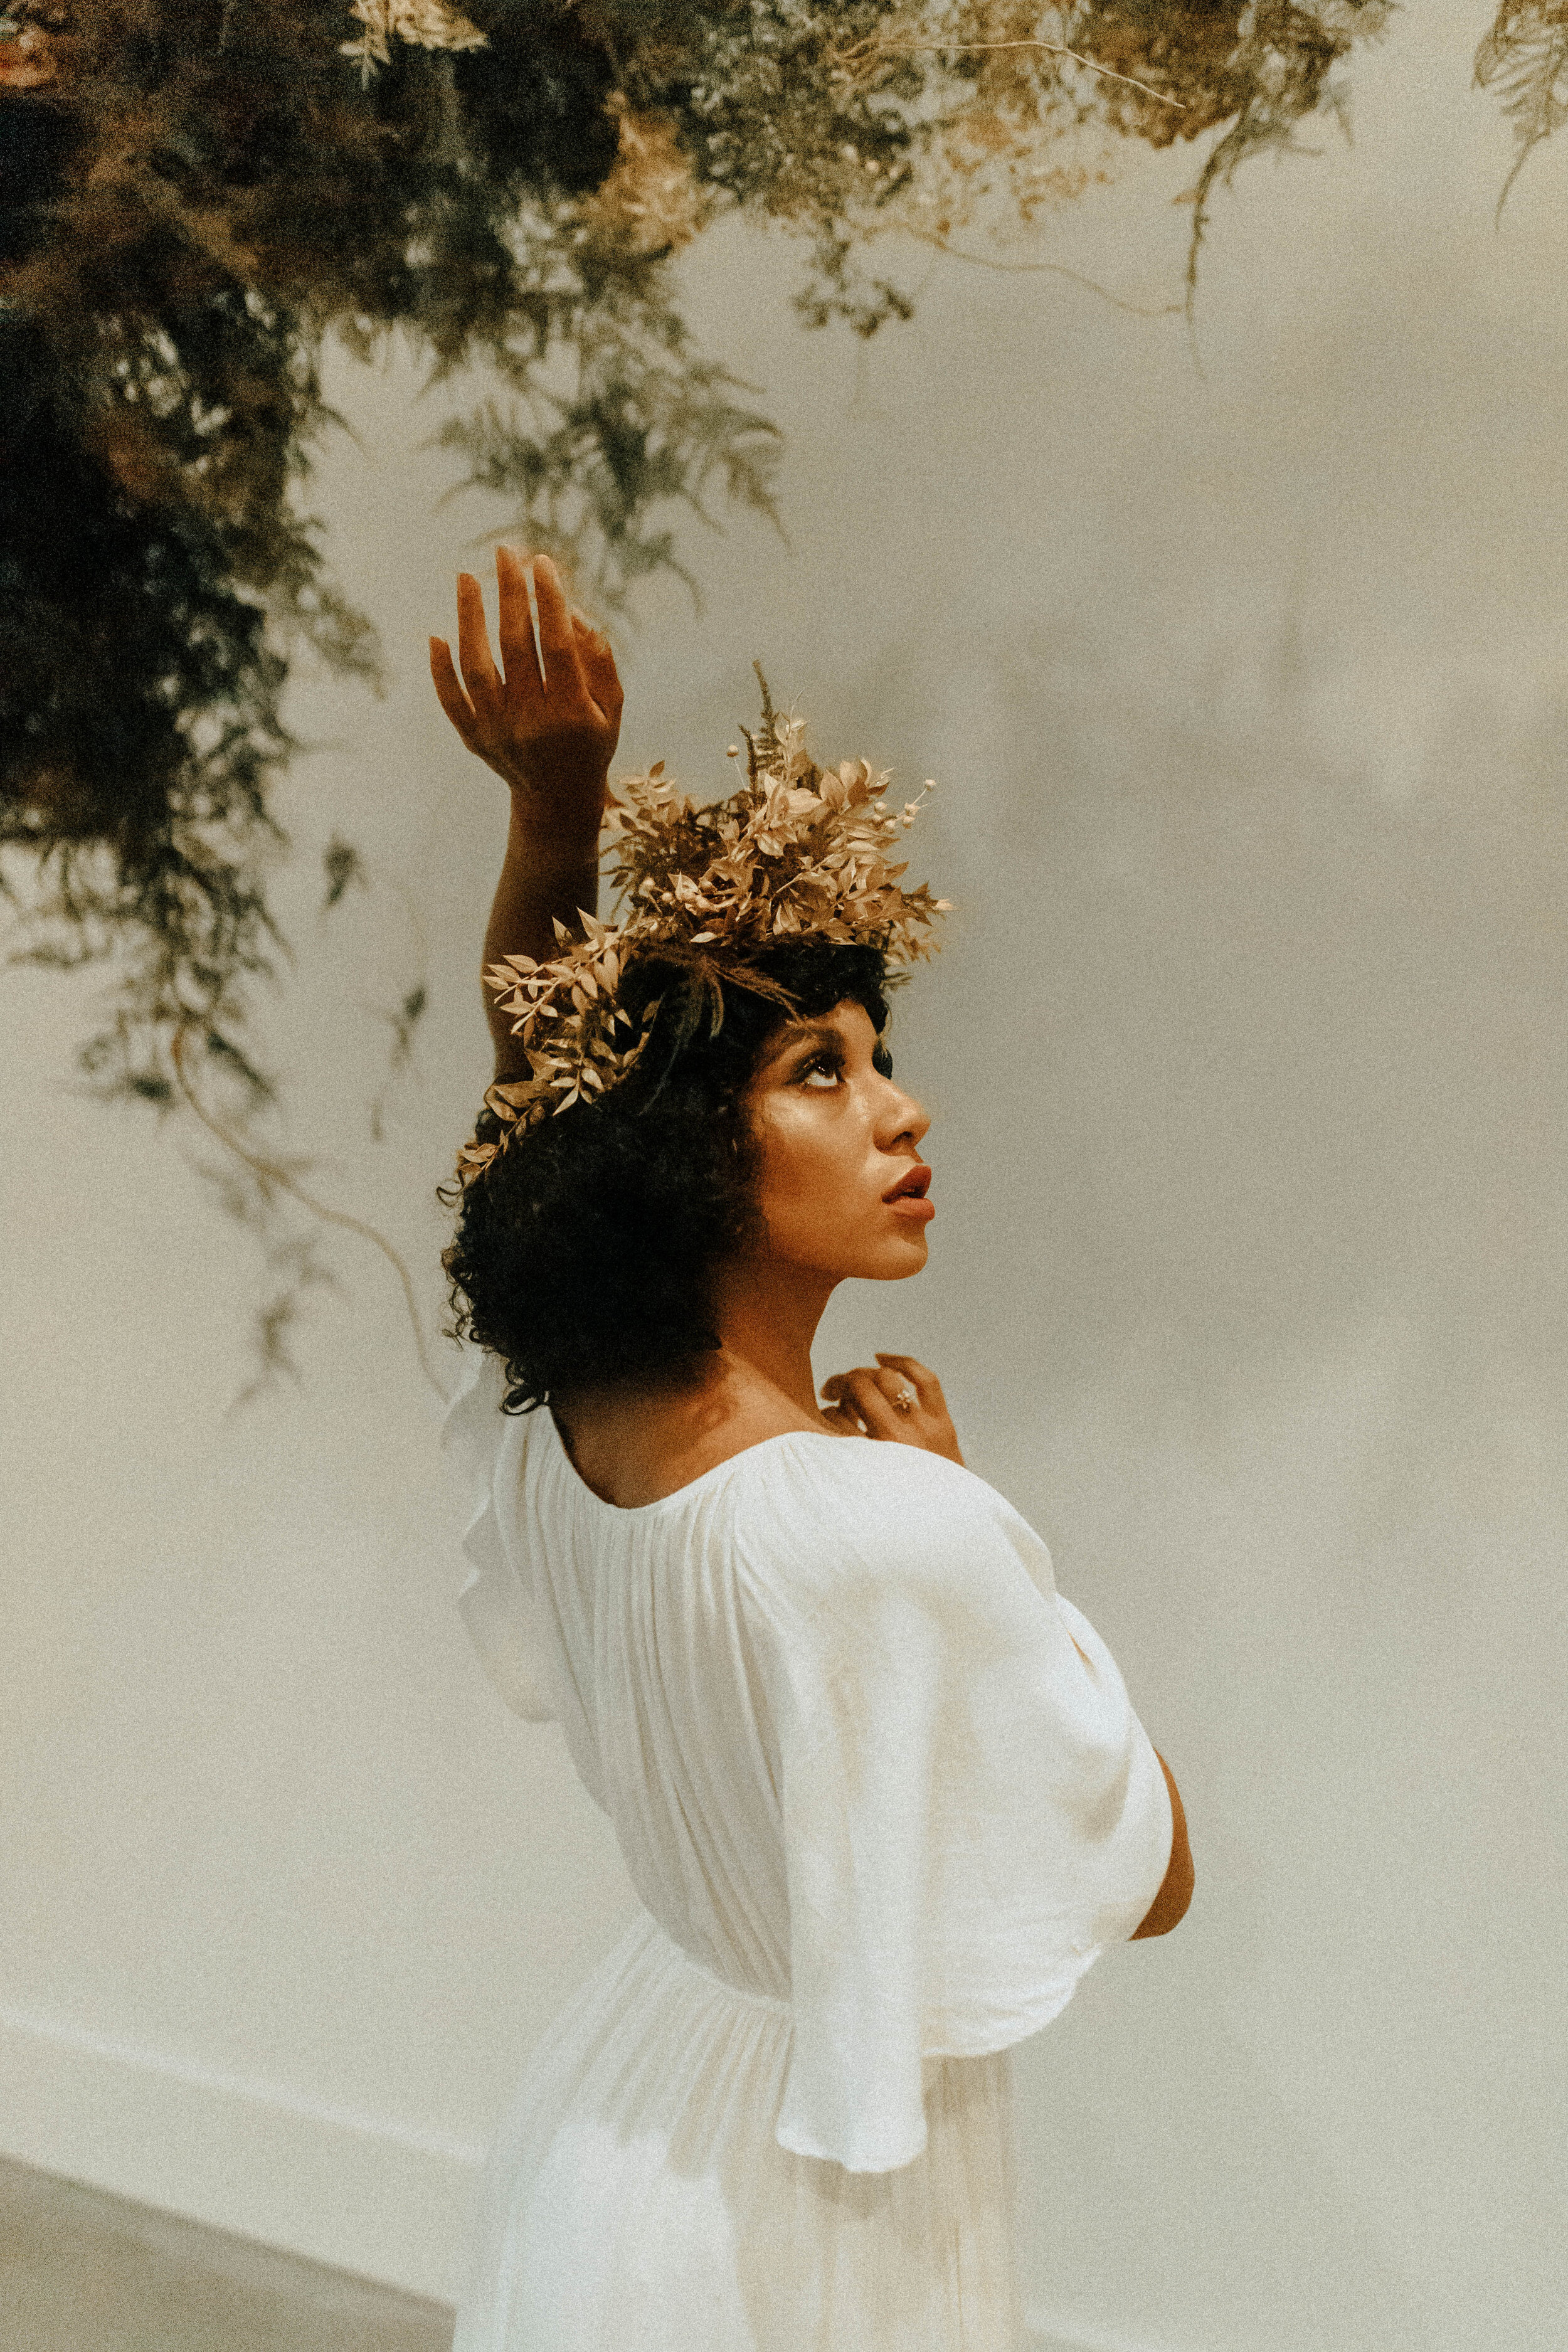 Skin tone inspired wearable floral design inspiration shoot. Earth tone hanging flower crown and floral installation at the Saint Elle, Nashville.